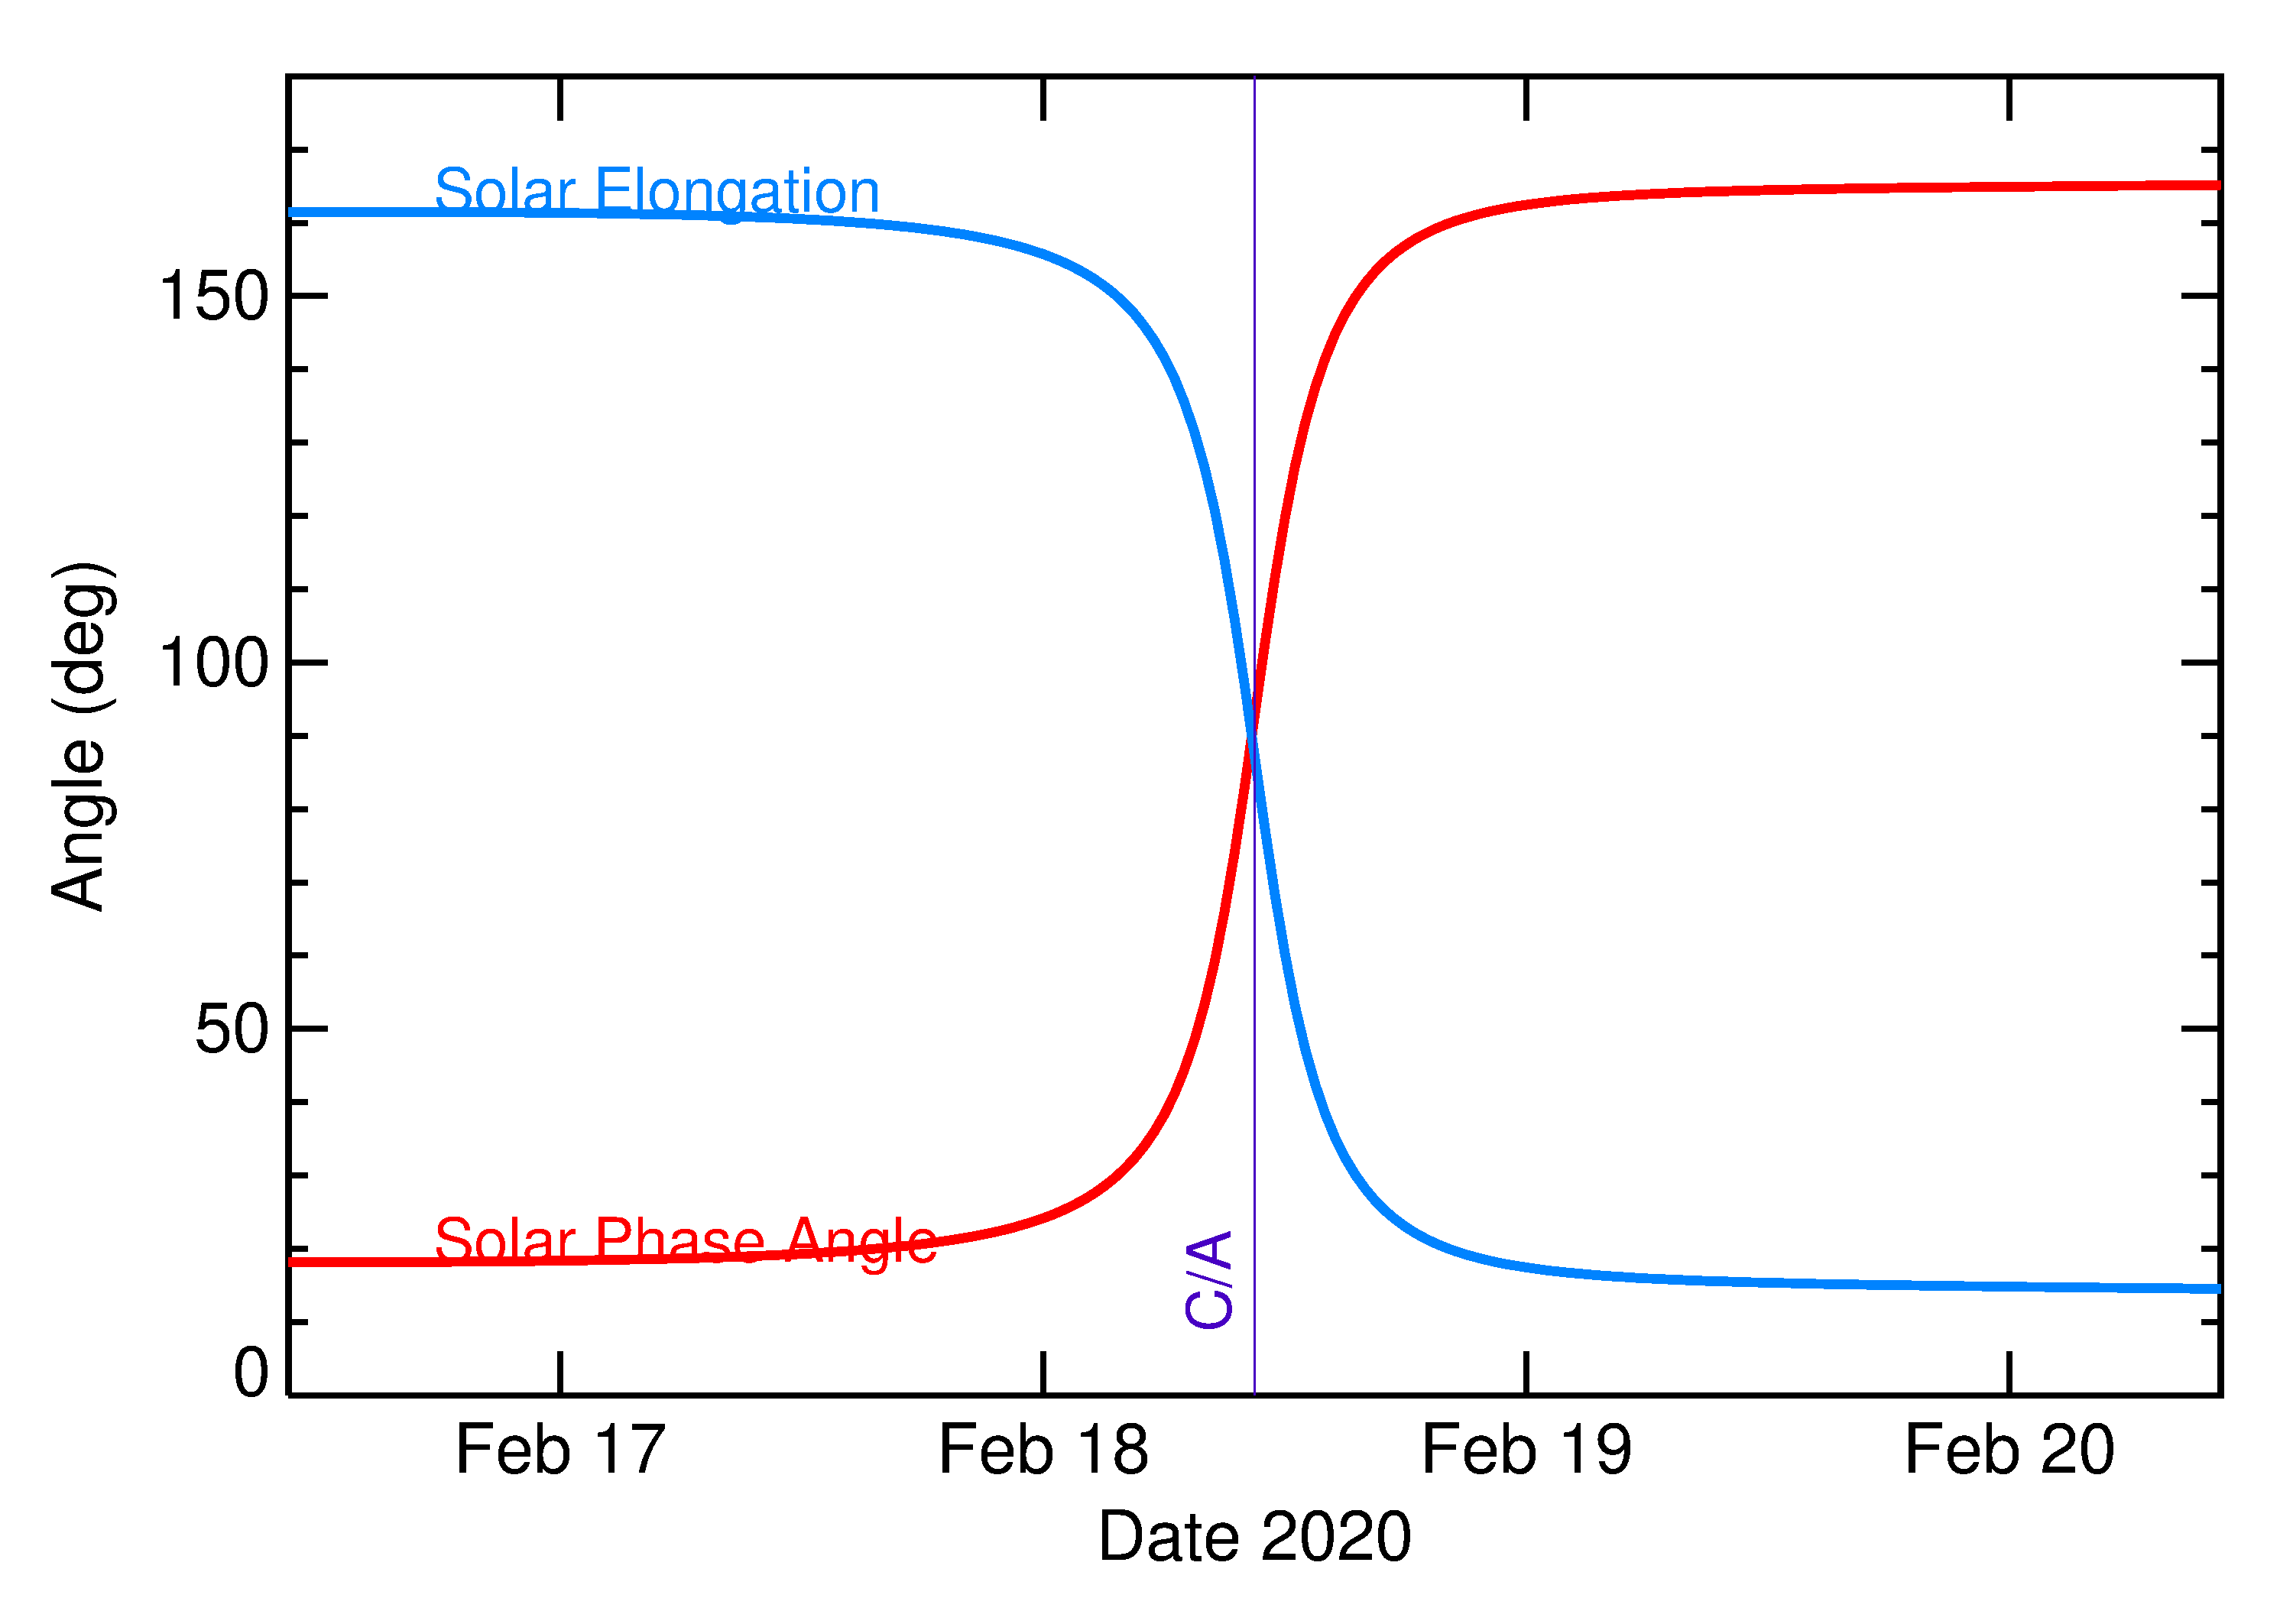 Solar Elongation and Solar Phase Angle of 2020 DA1 in the days around closest approach